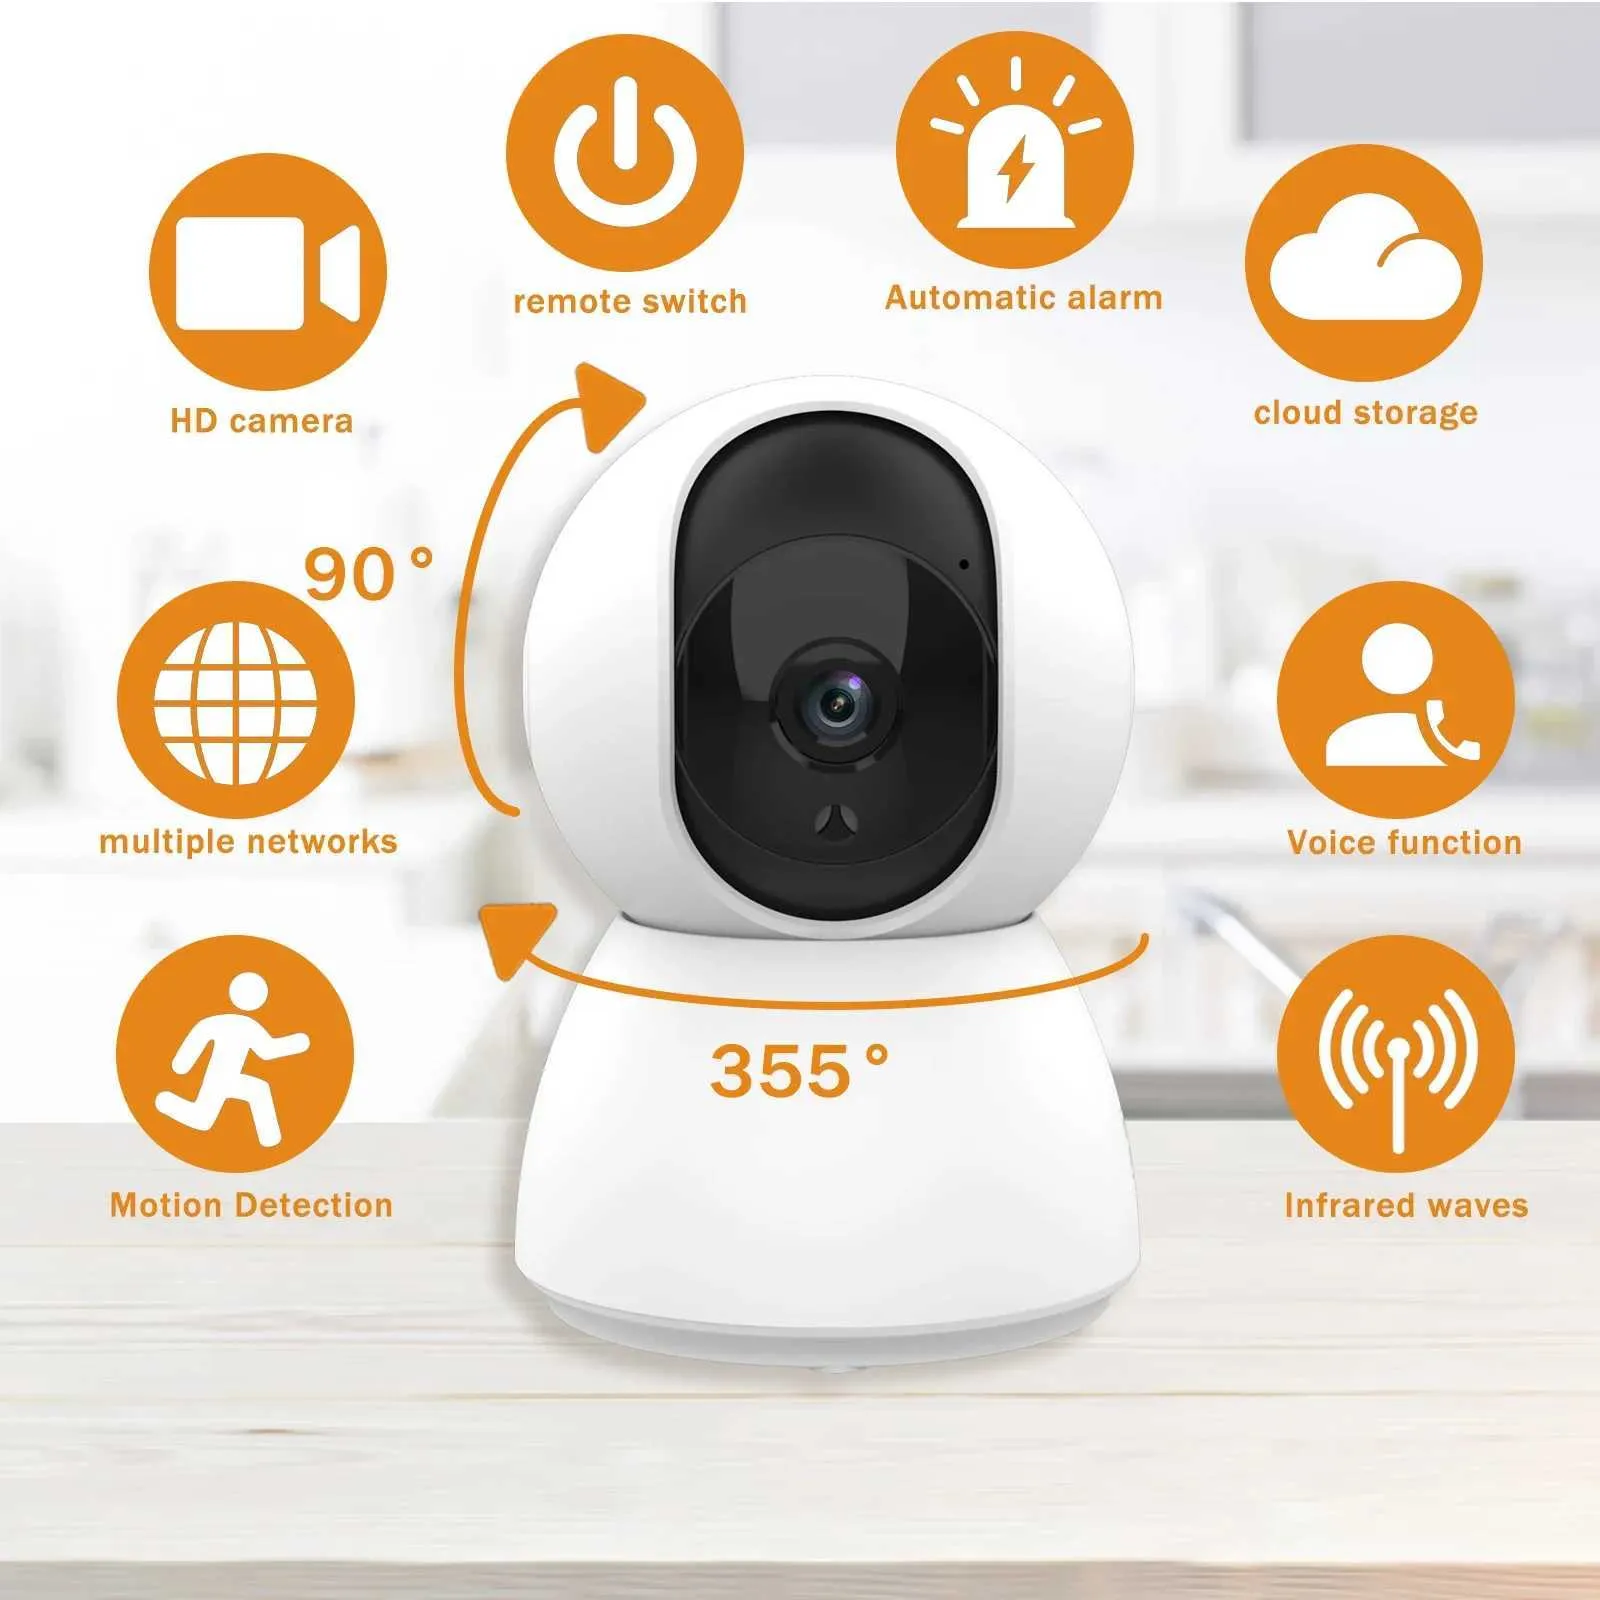 IP Cameras 3MP IP Camera 1080P Tuya Smart Home WiFi Indoor Wireless Security CCTV Monitoring Camera with Automatic Tracking Pet Monitor d240510